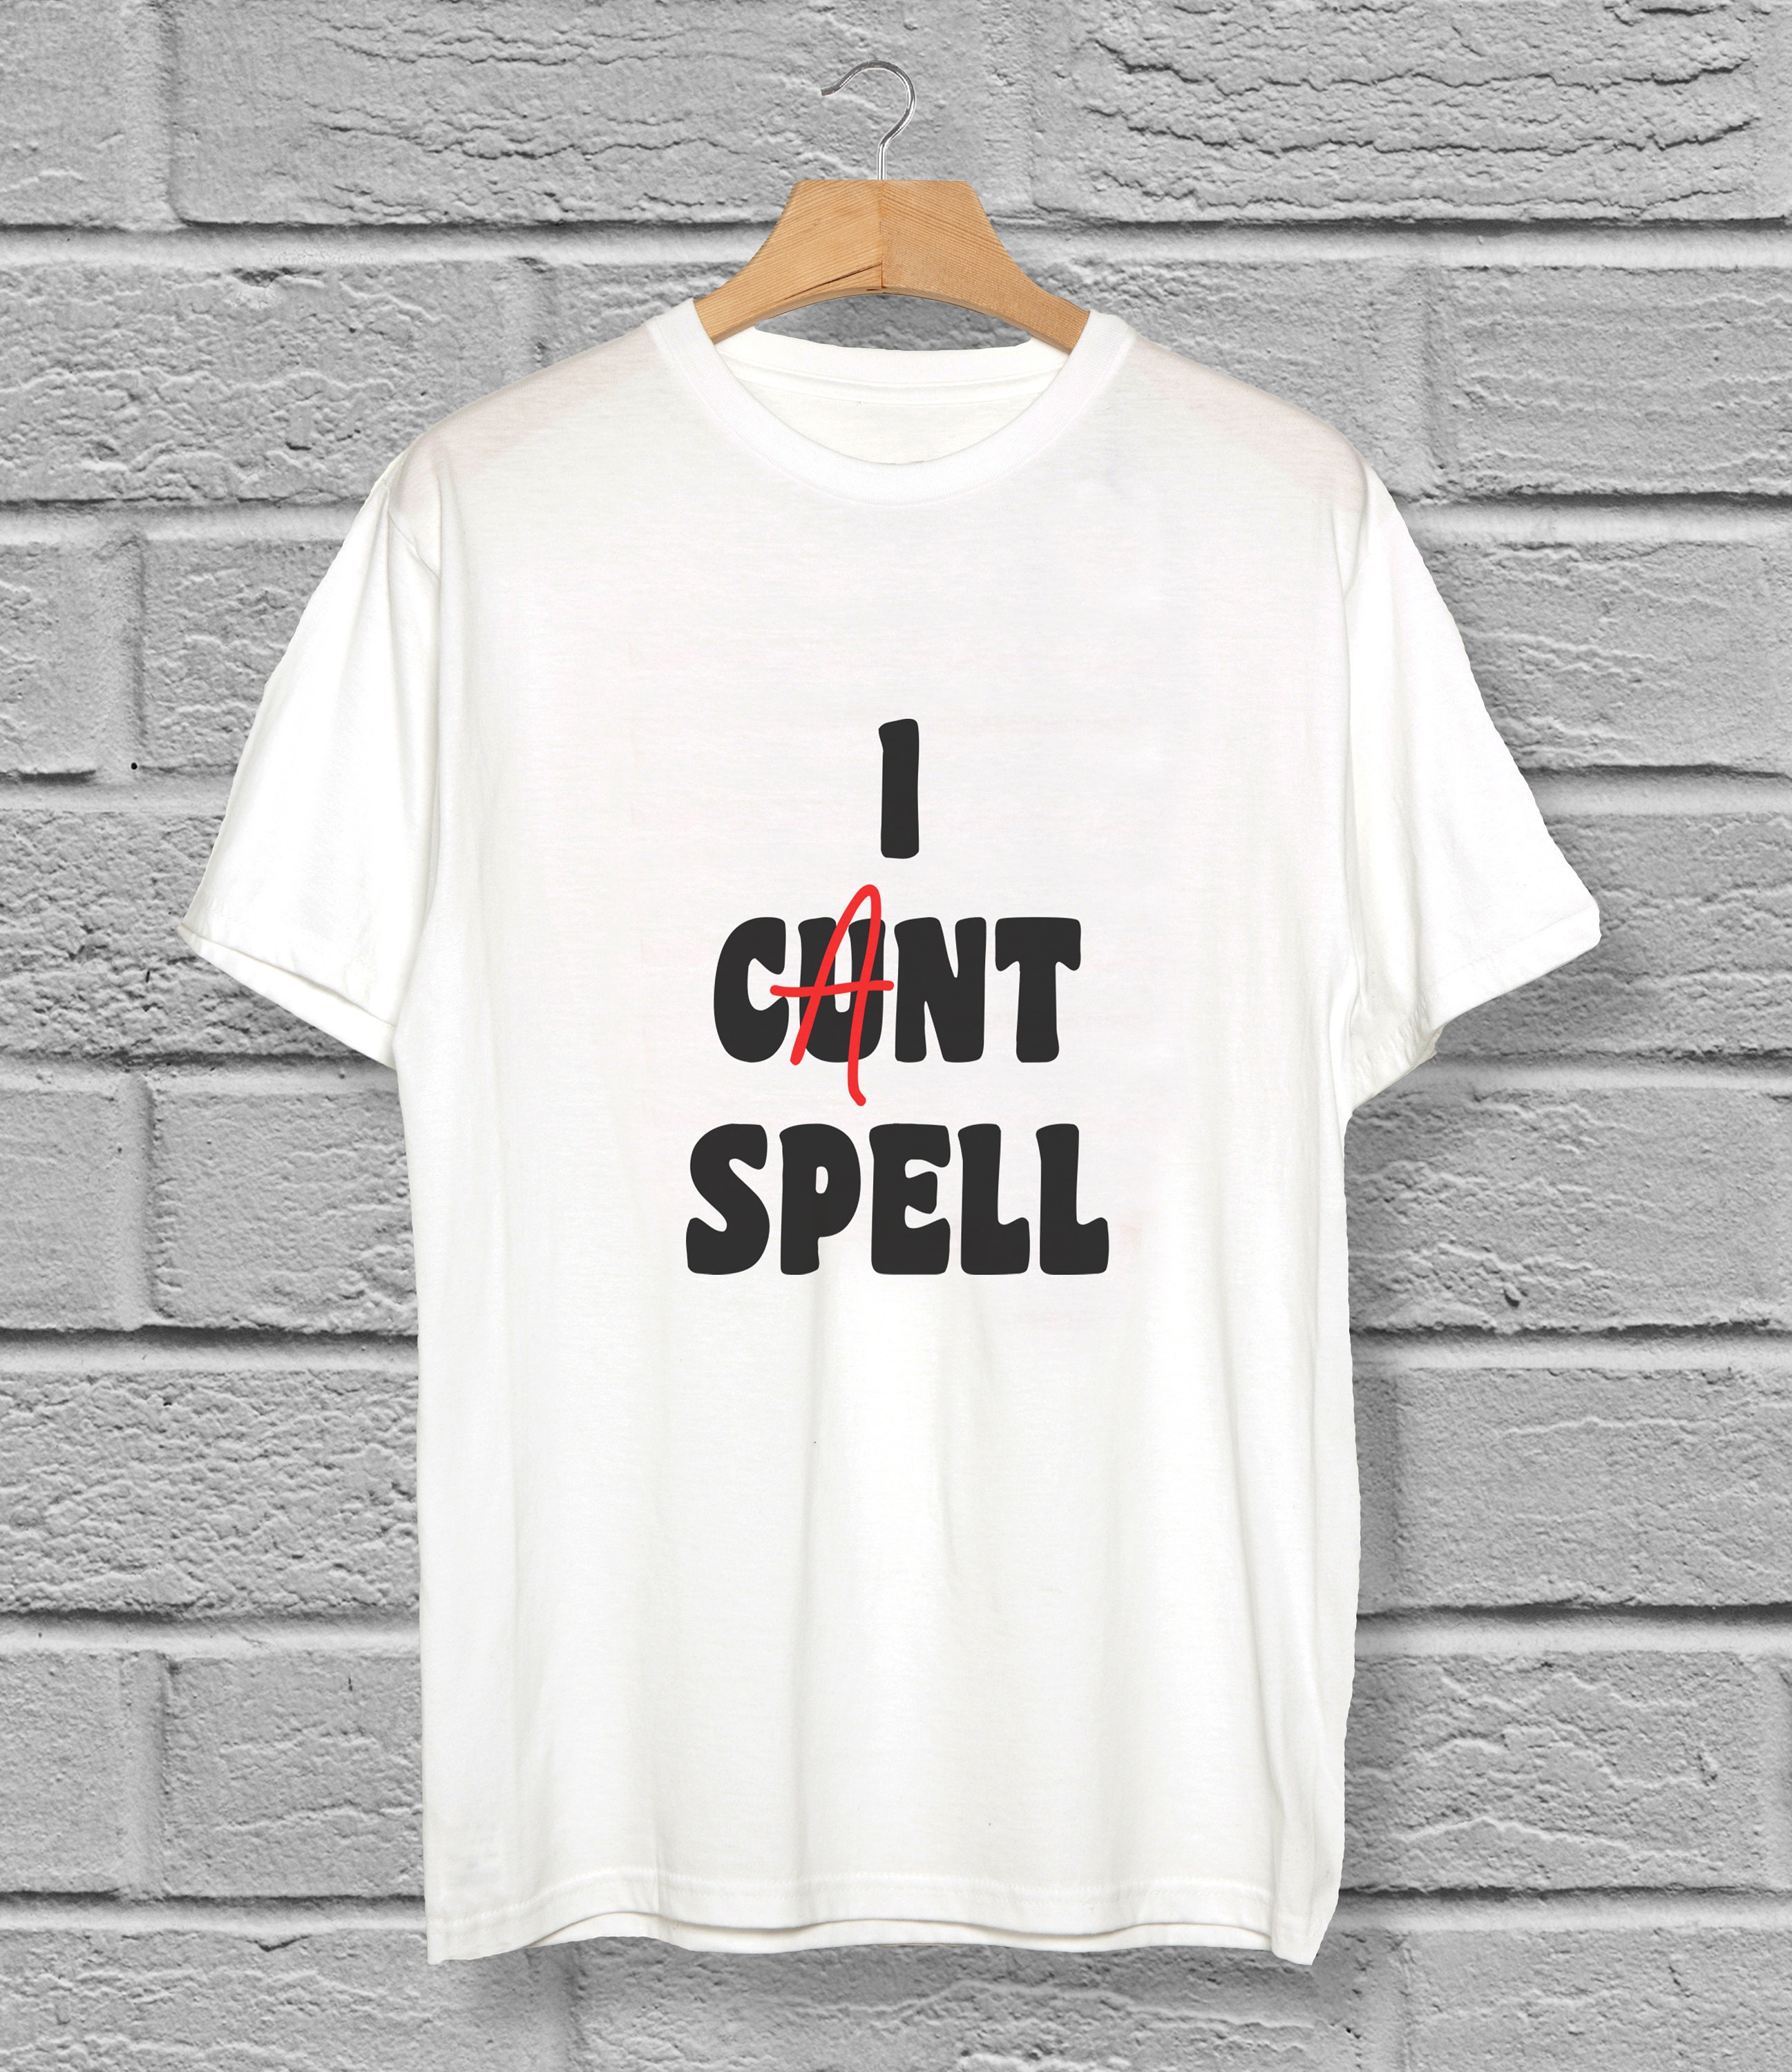 I Cunt T-shirt Funny Rude and Offensive Top Rude - Denmark